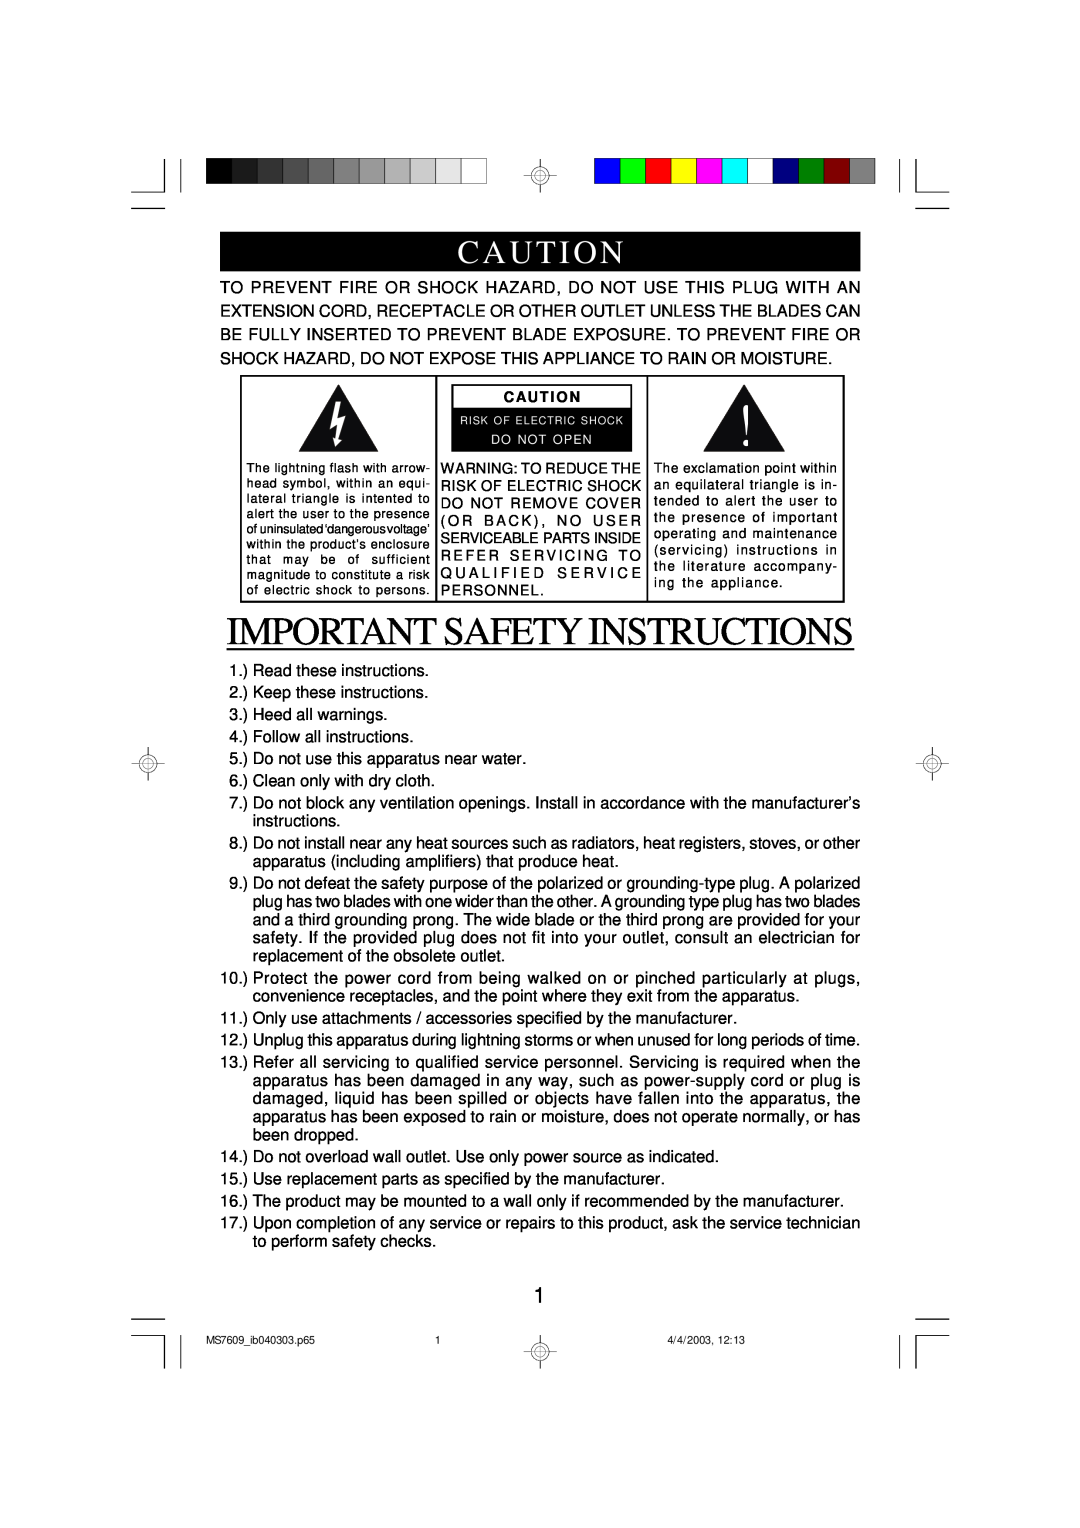 Emerson MS7609 owner manual Important Safety Instructions, Caut I On 